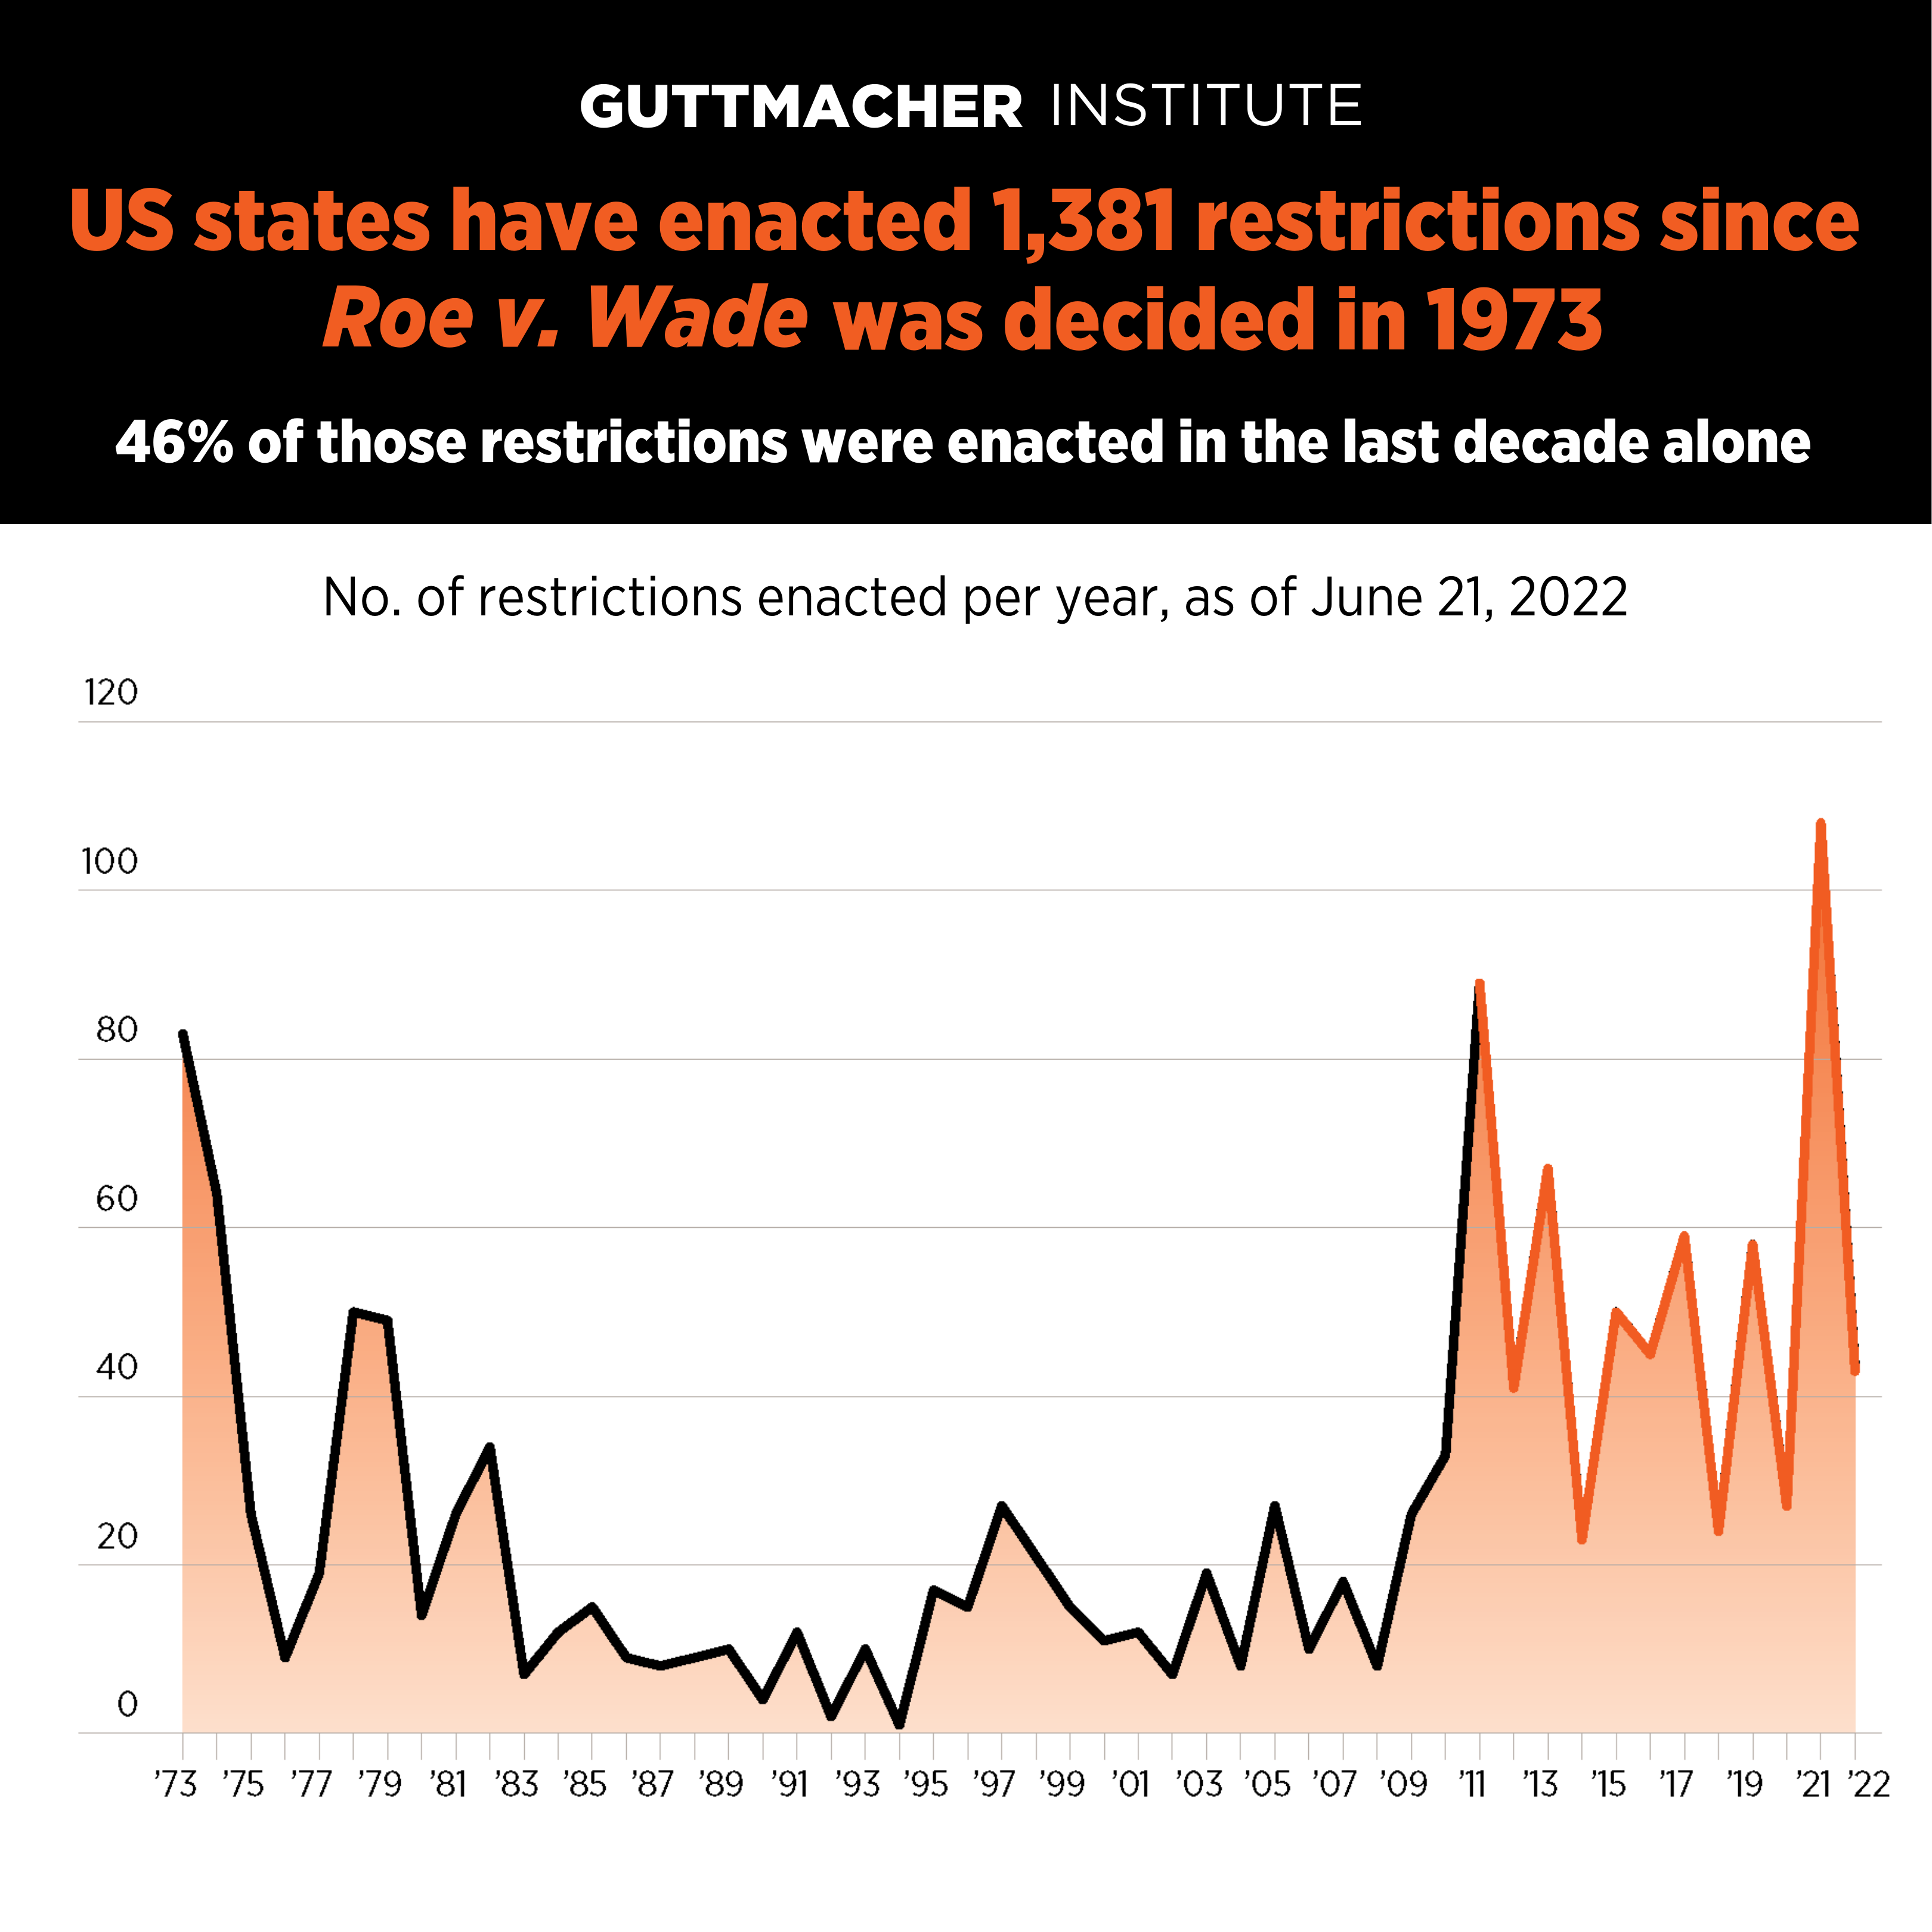 US states have enacted 1,381 abortion restrictions since Roe v. Wade was decided in 1973